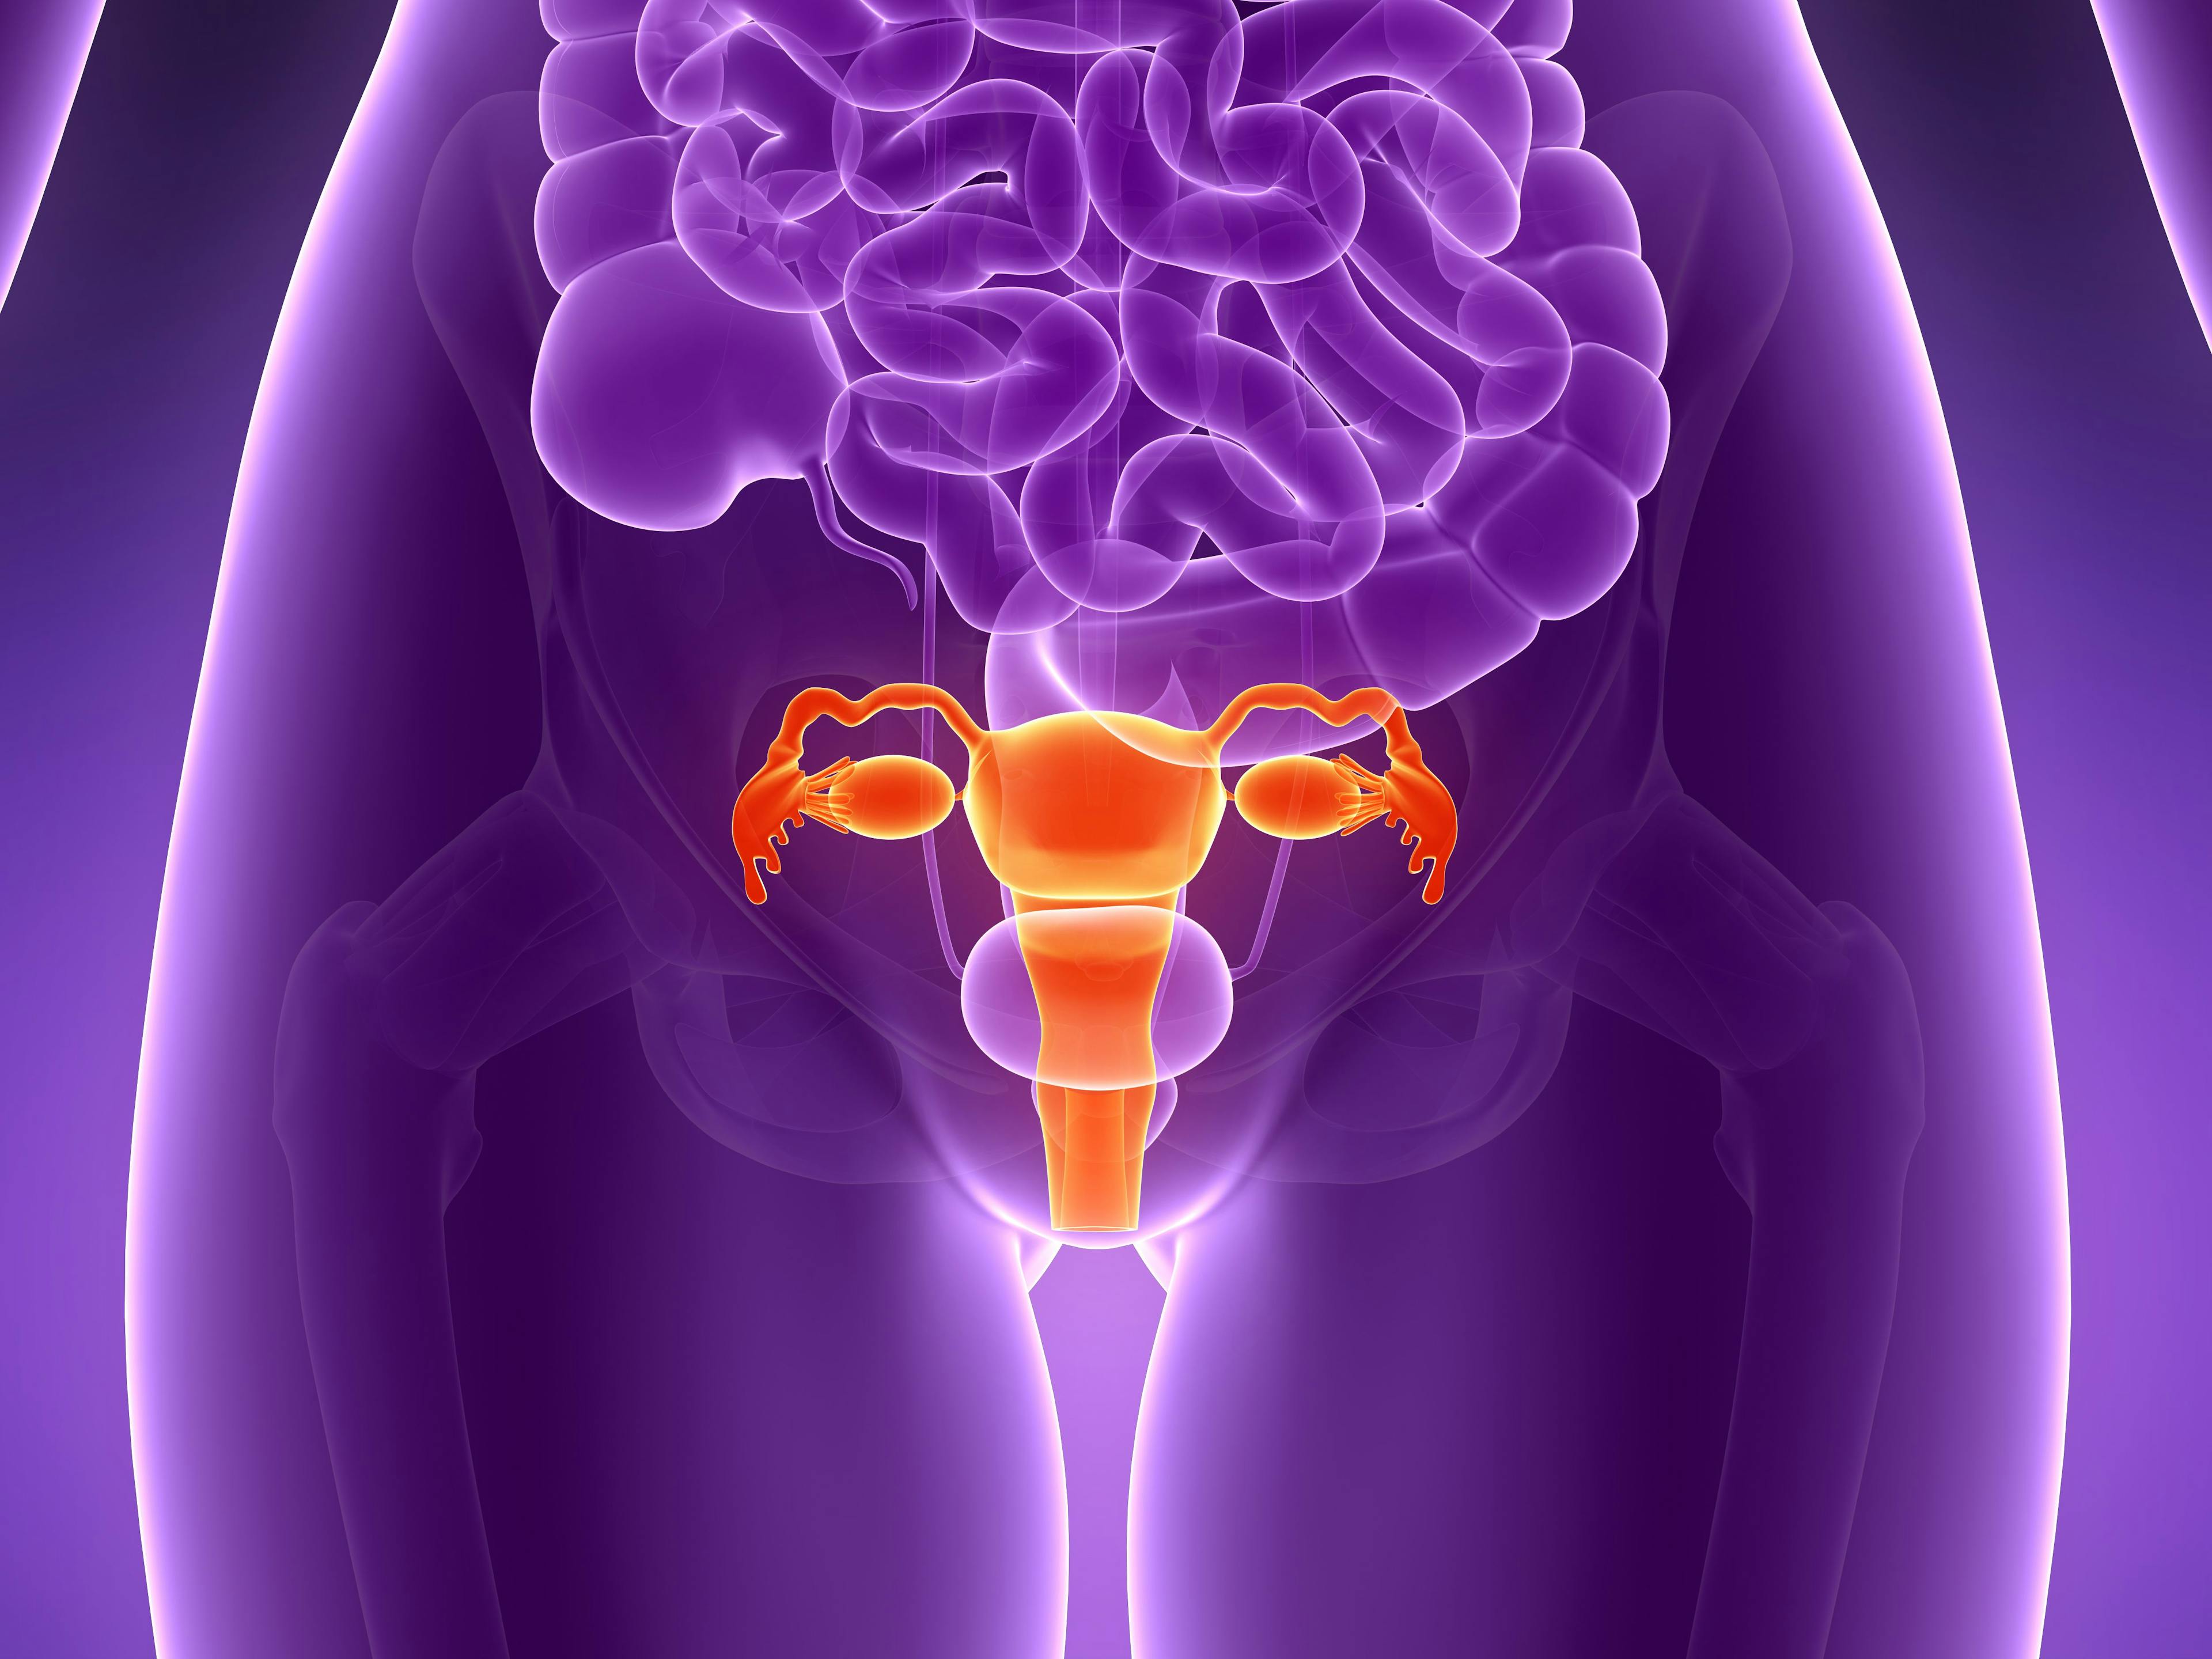 Illustration of human female reproductive system